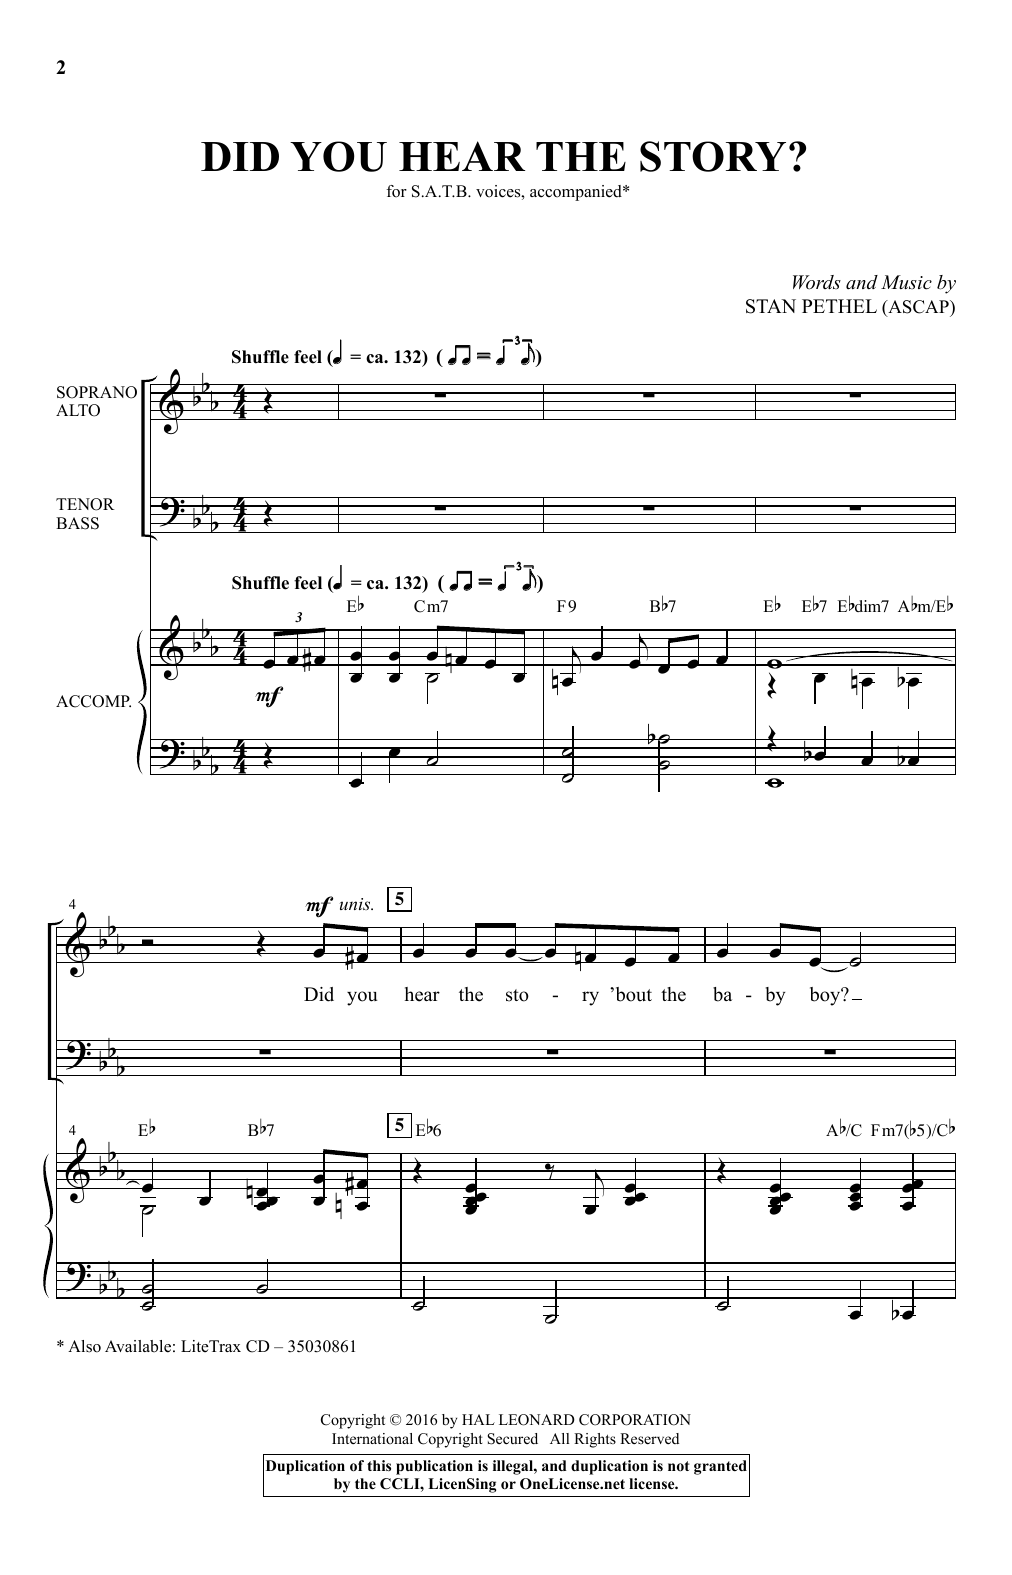 Download Stan Pethel Did You Hear The Story? Sheet Music